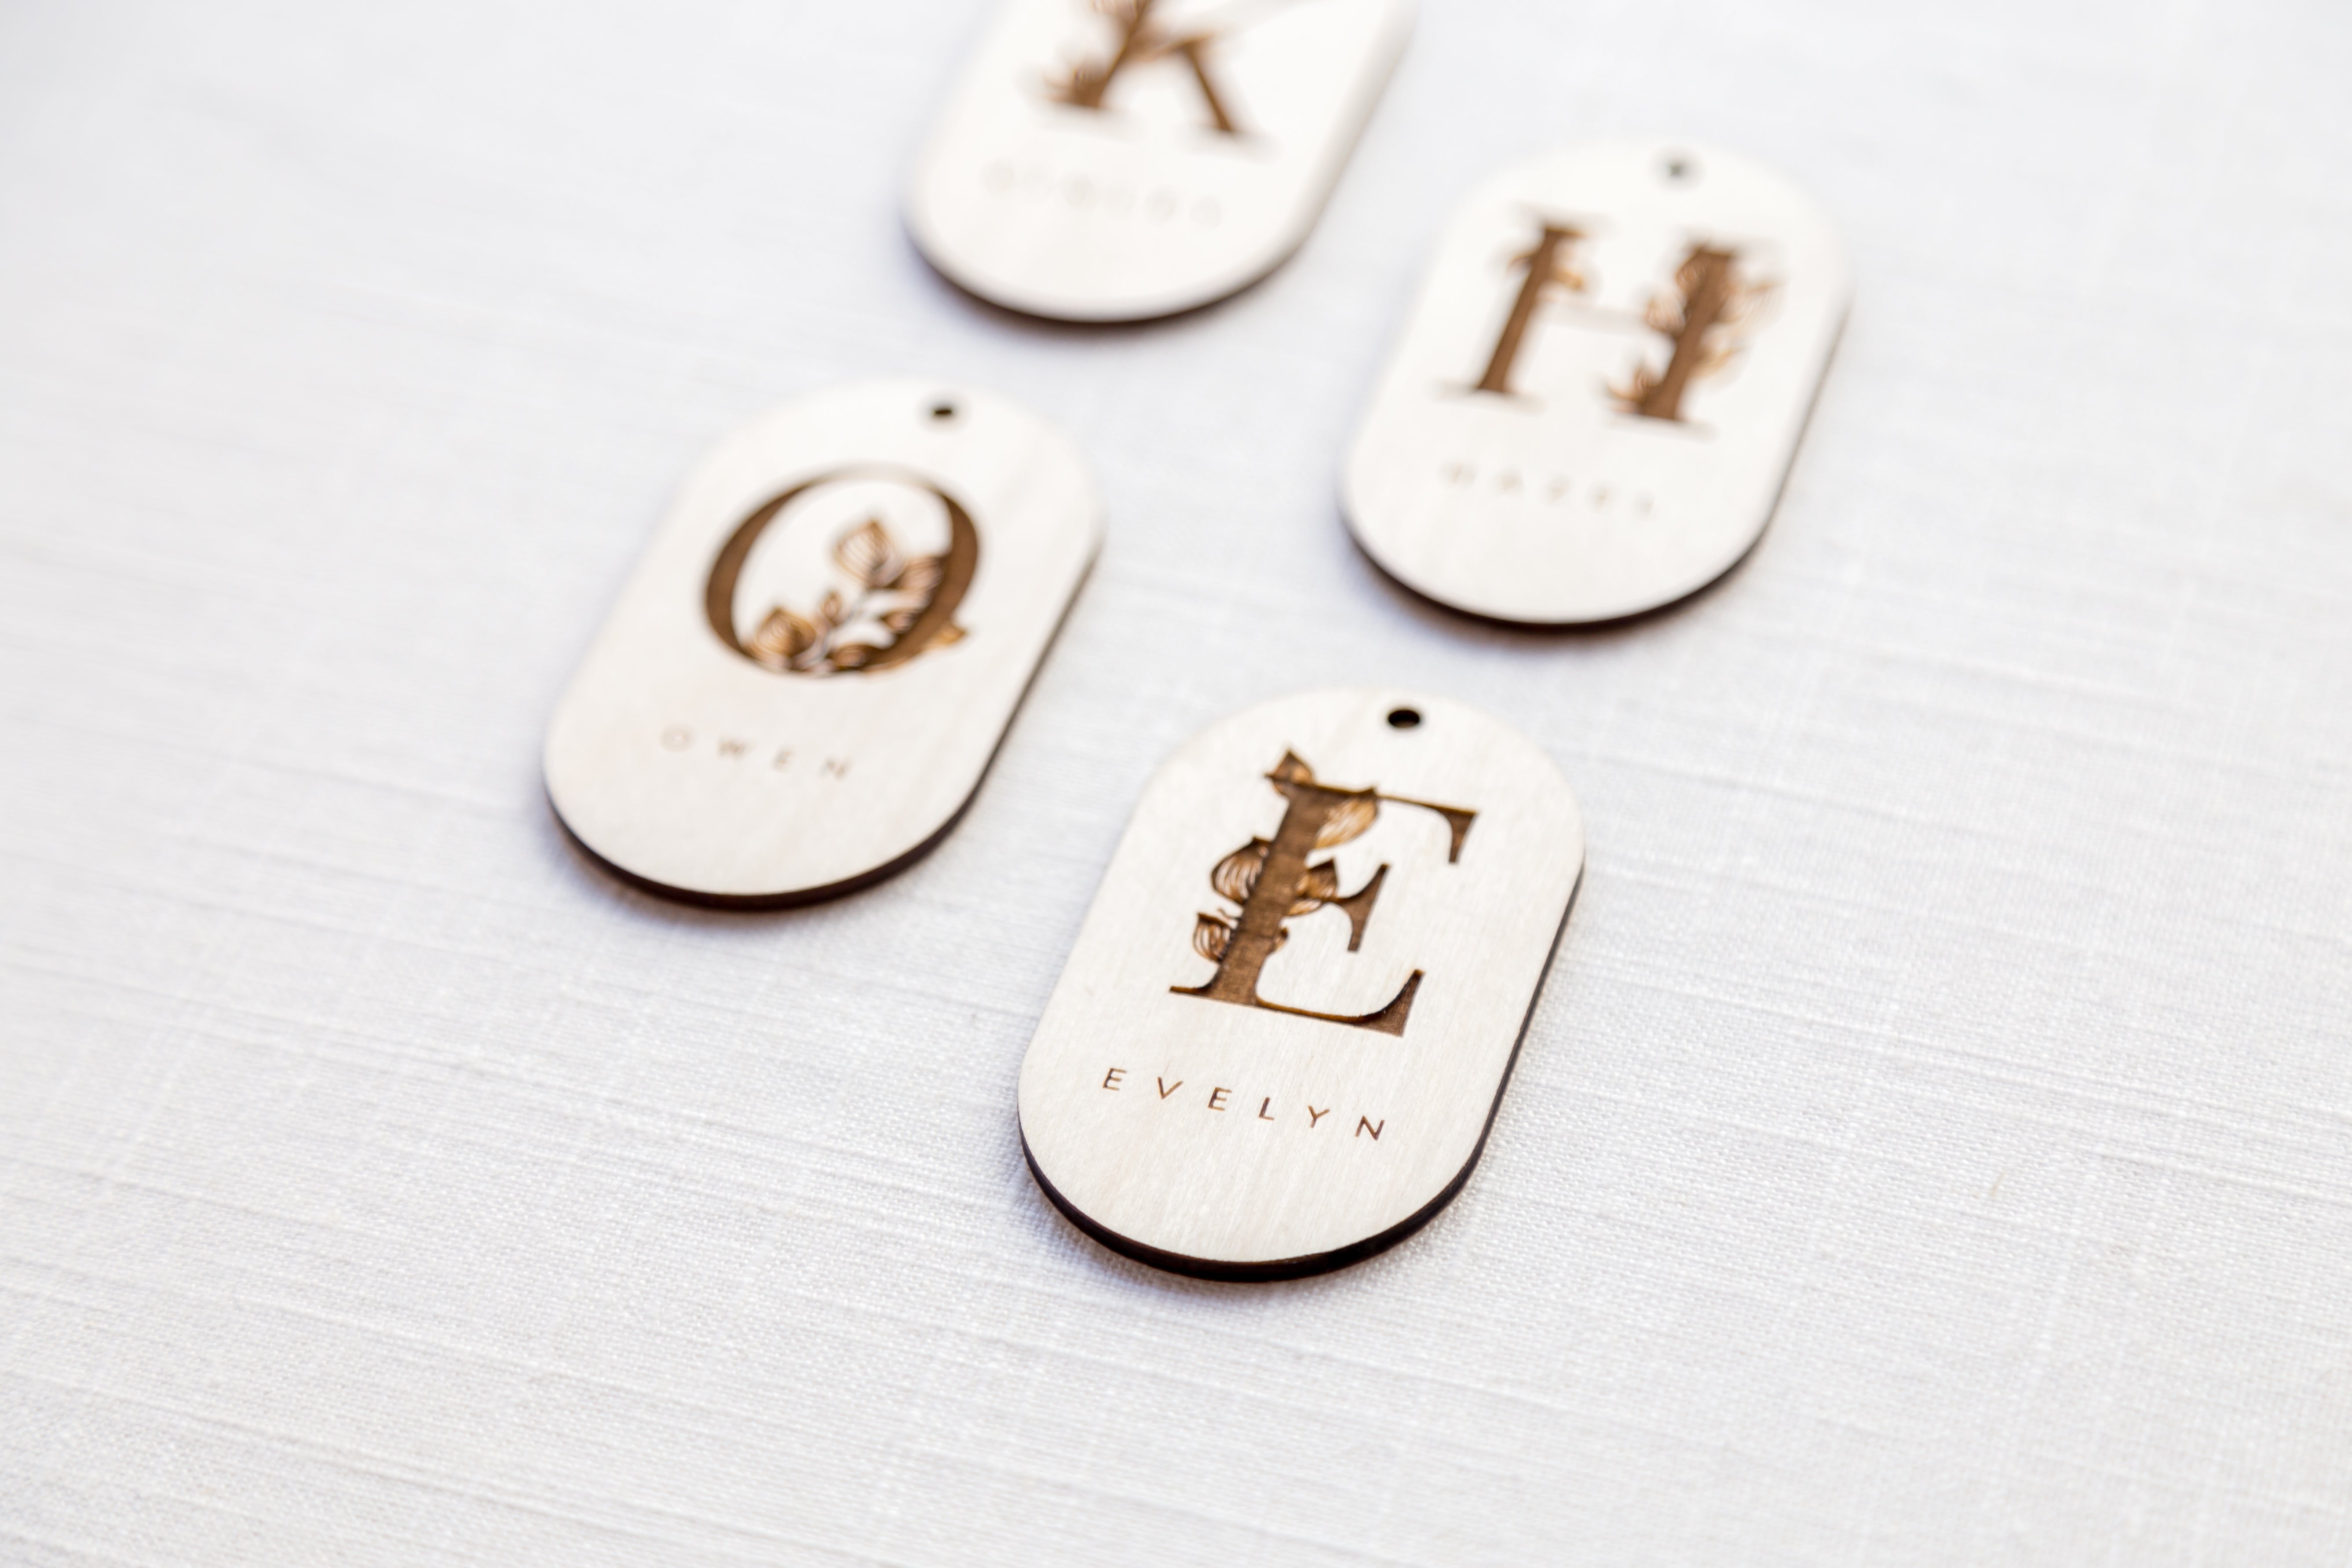 Personalized Wooden Botanical Monogram Tags